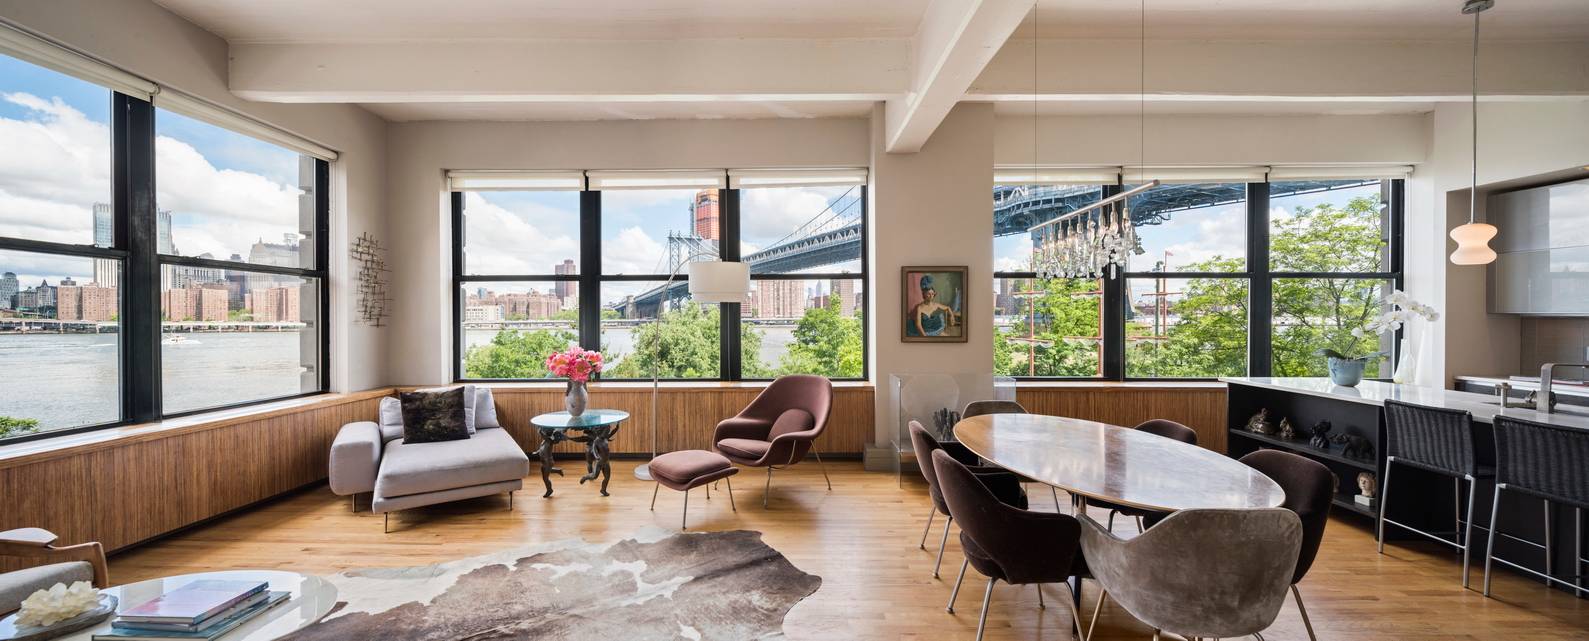 STUNNING massive corner loft with unparalleled views of the East River, Bridges and Skyline!